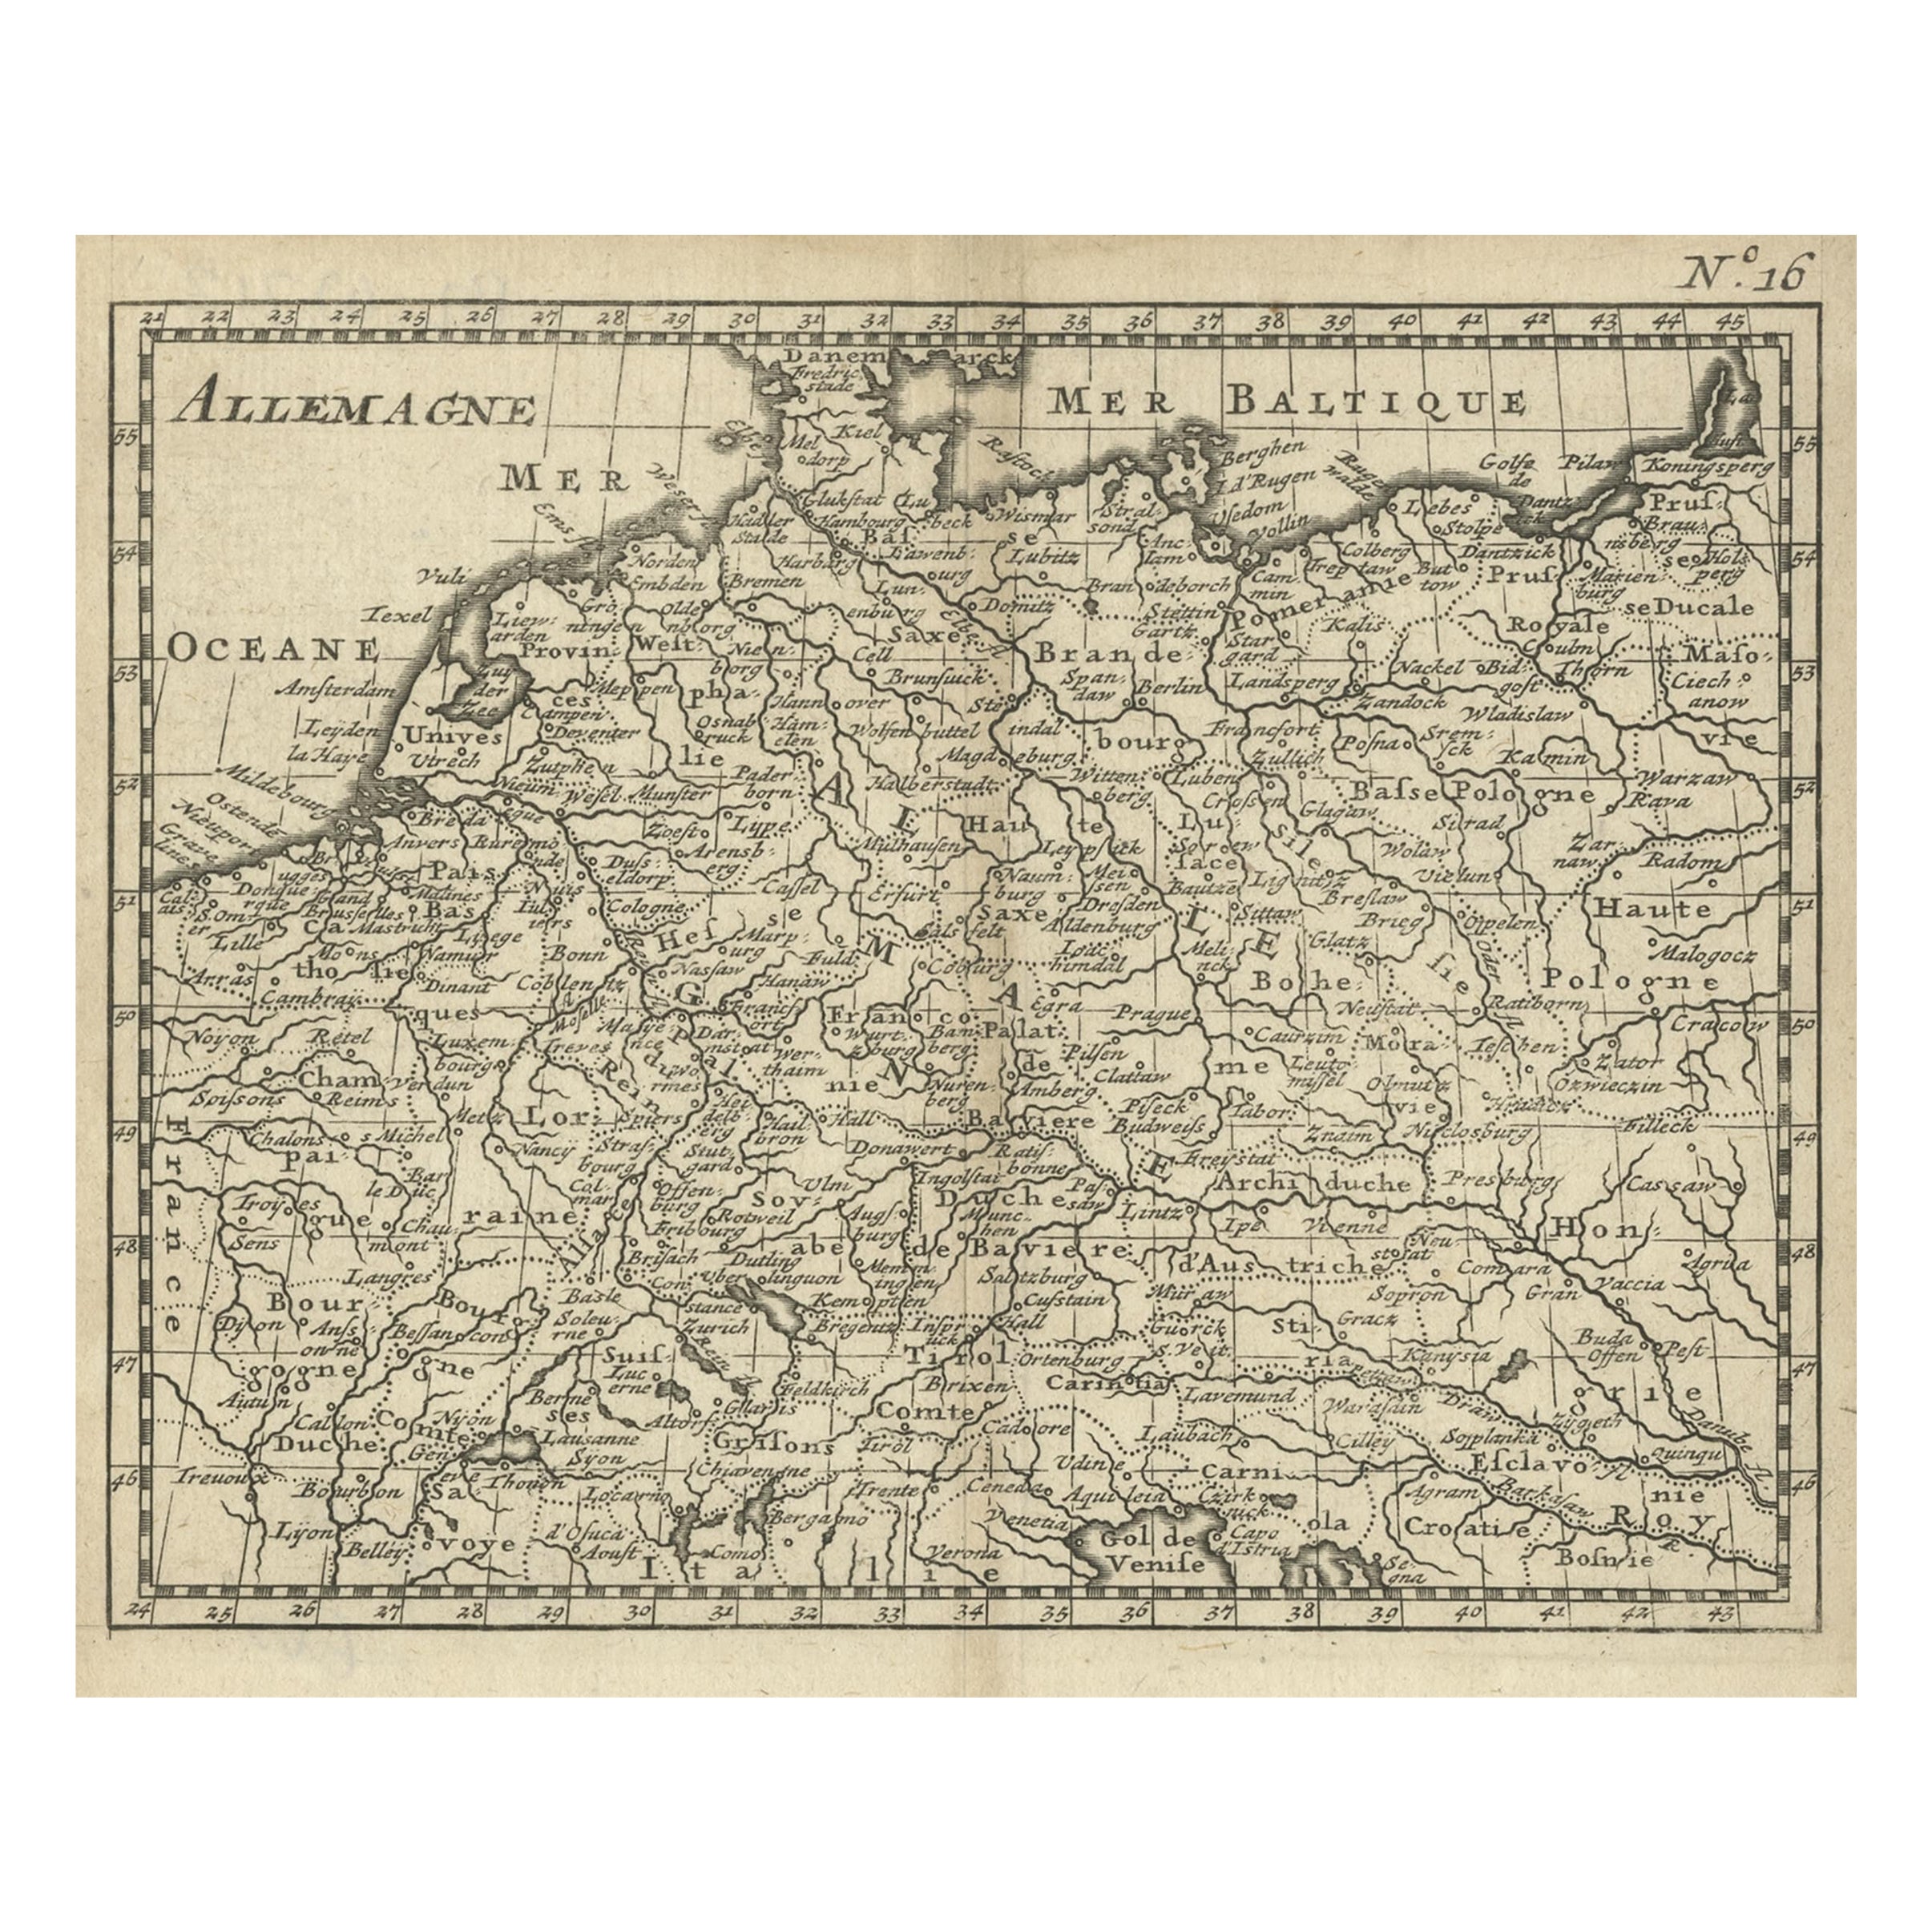 Antique Copper Engraved Map of Germany in the Early 18th Century, c.1740